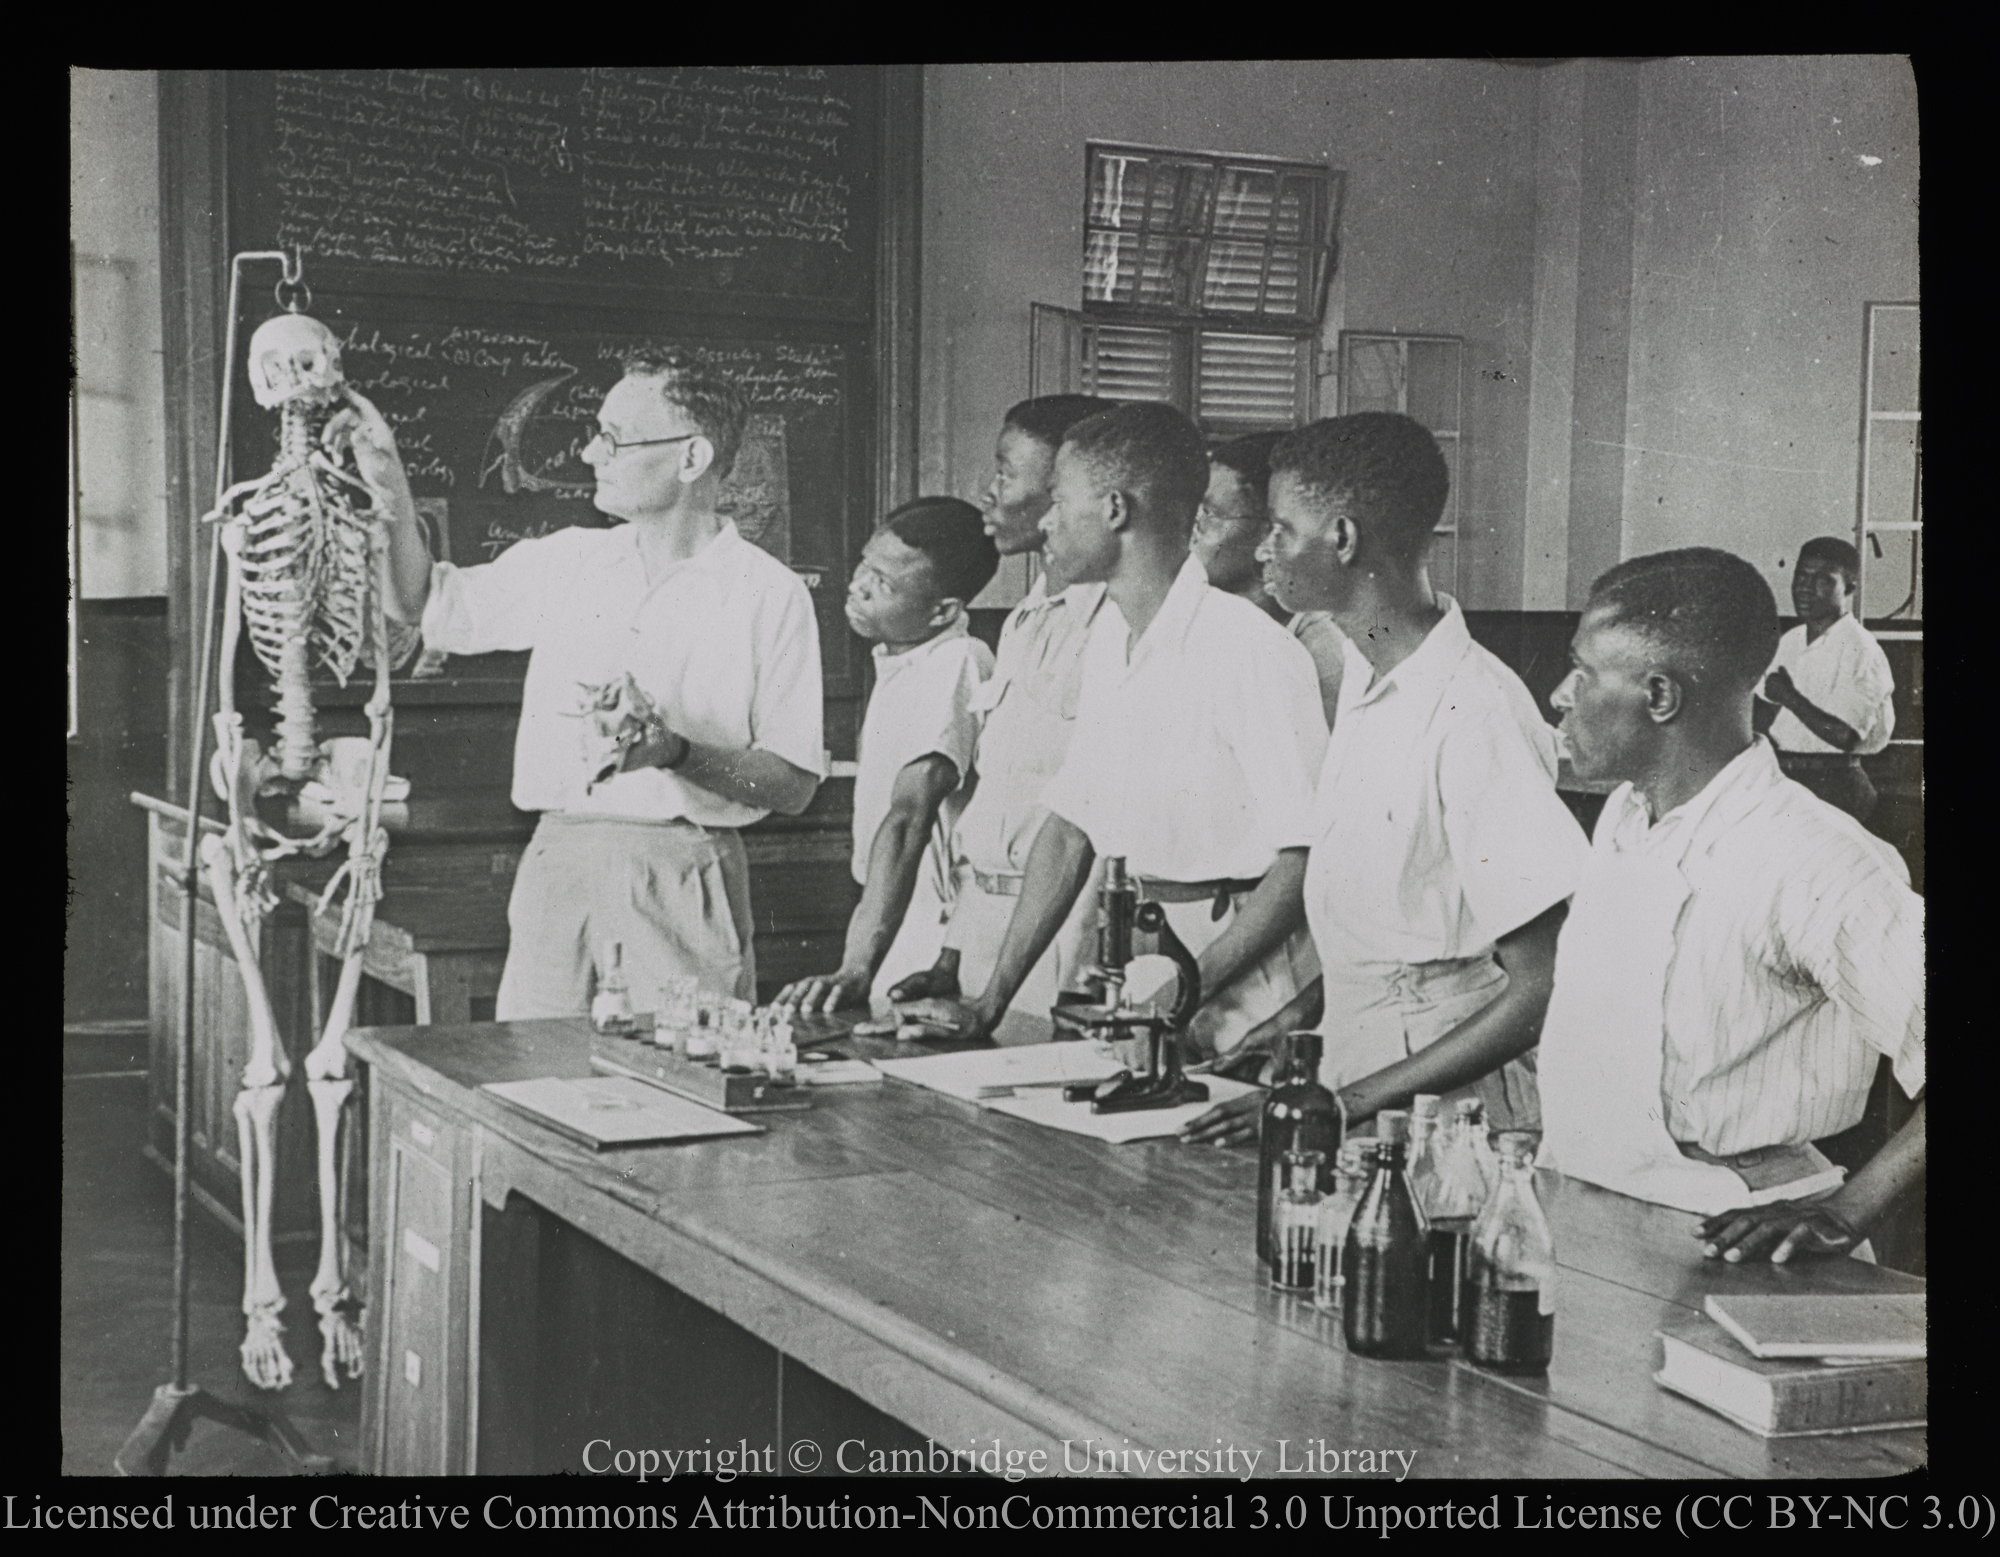 Anatomy lesson in the zoology laboratory at Achimota College, Gold Coast [Ghana], 1900 - 1947